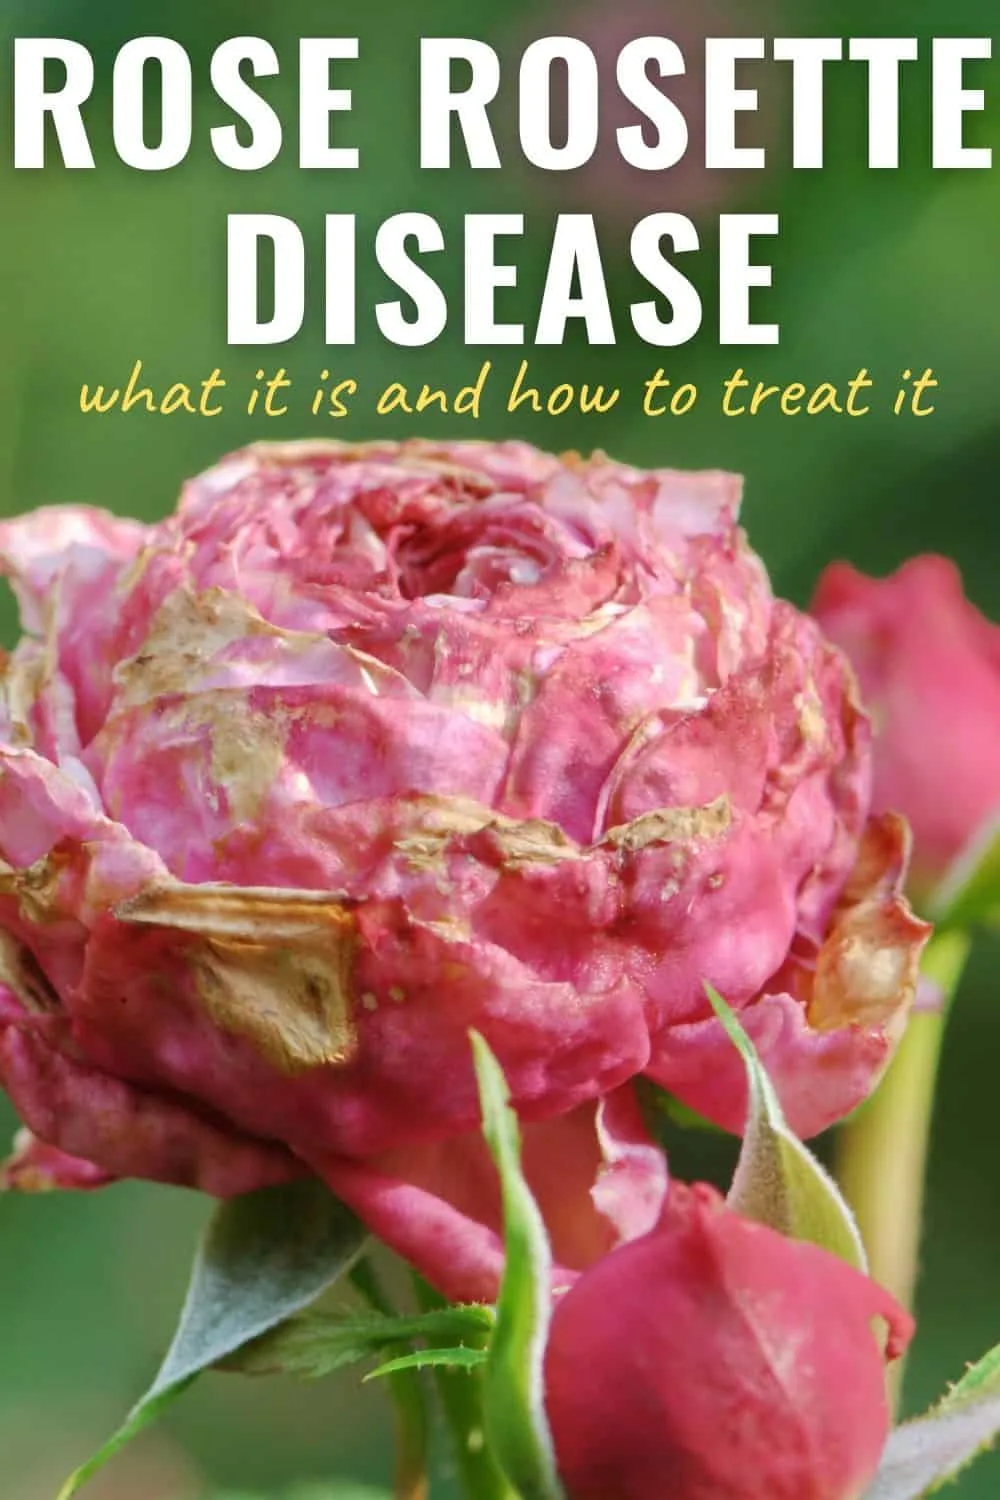 Rose rosette disease - what it is and how to treat it